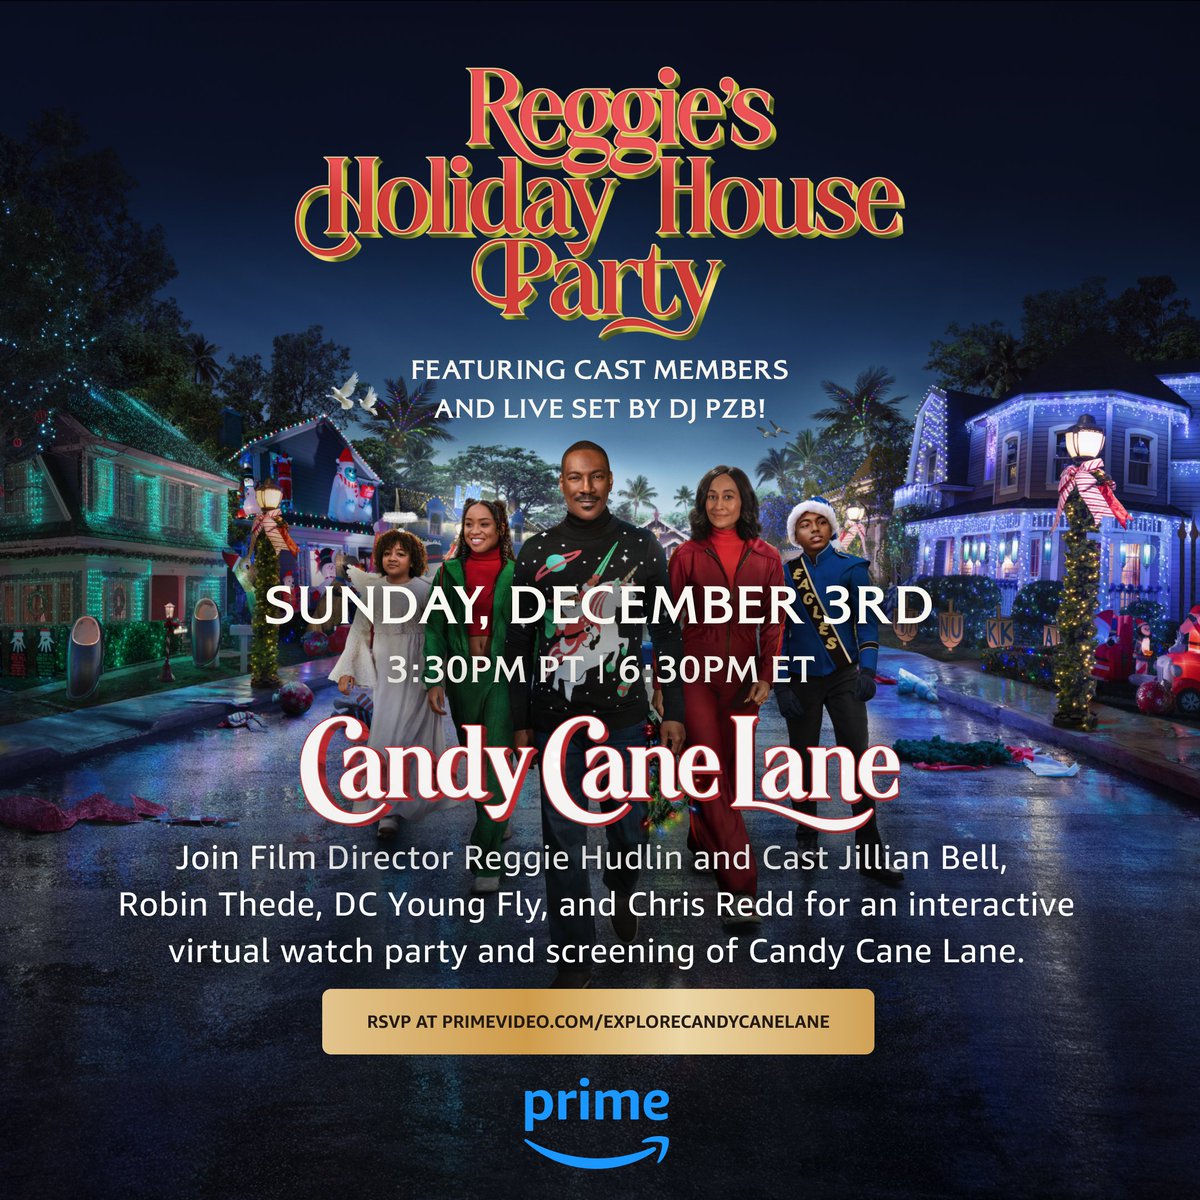 Reggie’s Holiday House Party, a Candy Cane Lane watch party with the director and cast, airs LIVE globally on Sunday 3:30 PST / 6:30pm EST. RSVP at primevideo.com/explorecandyca…